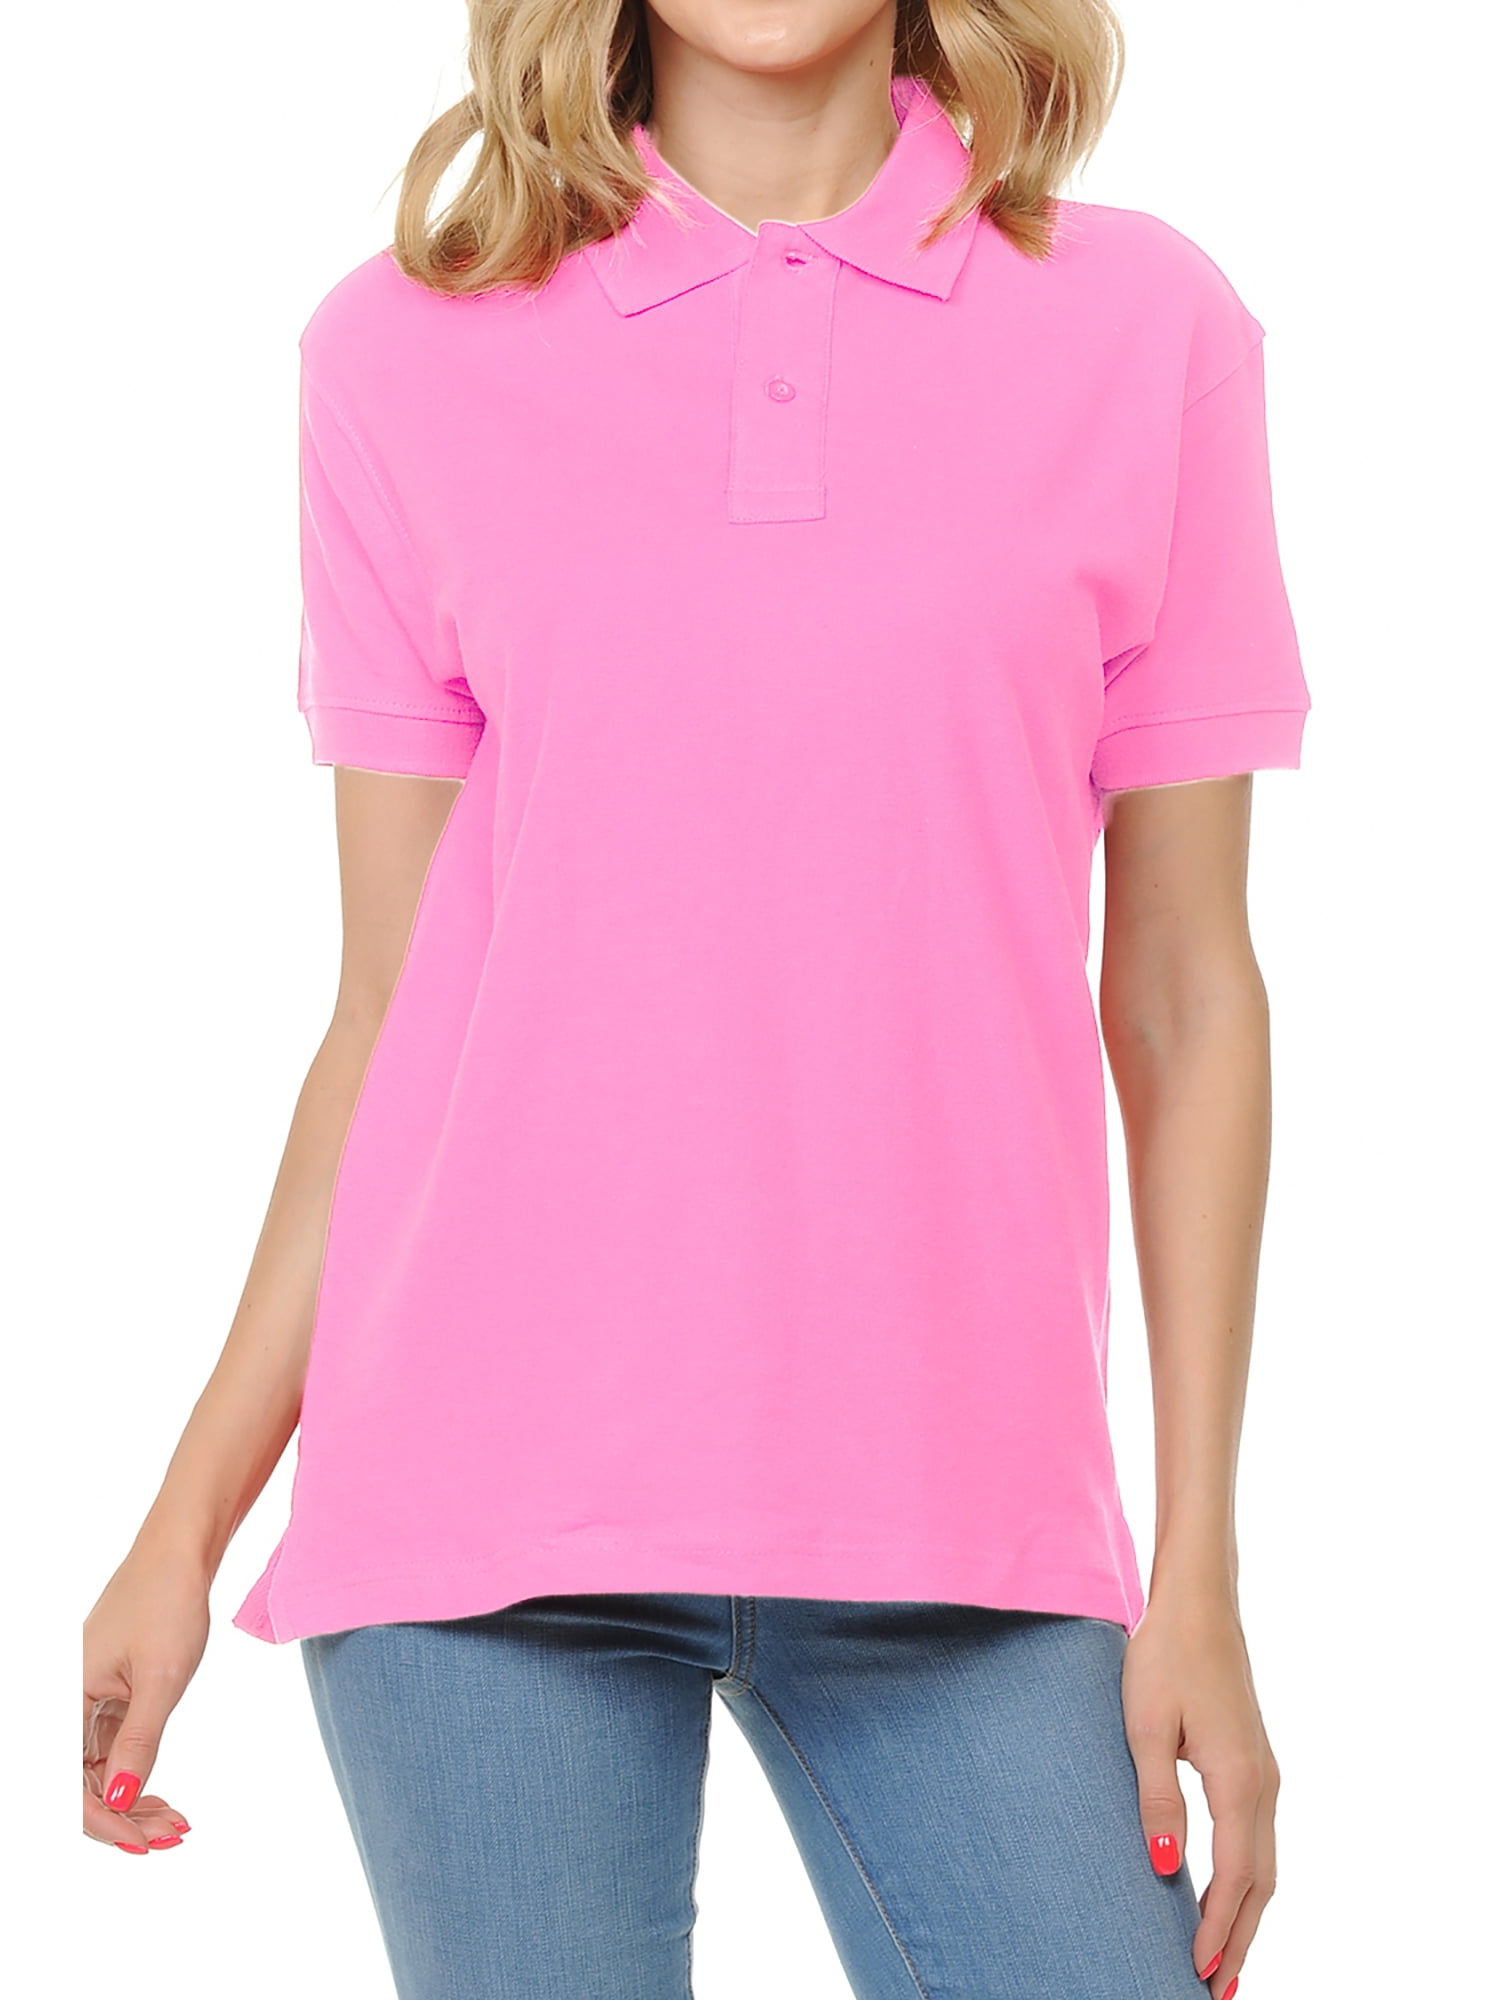 Basico (Pink) Polo Collared Shirts For ...